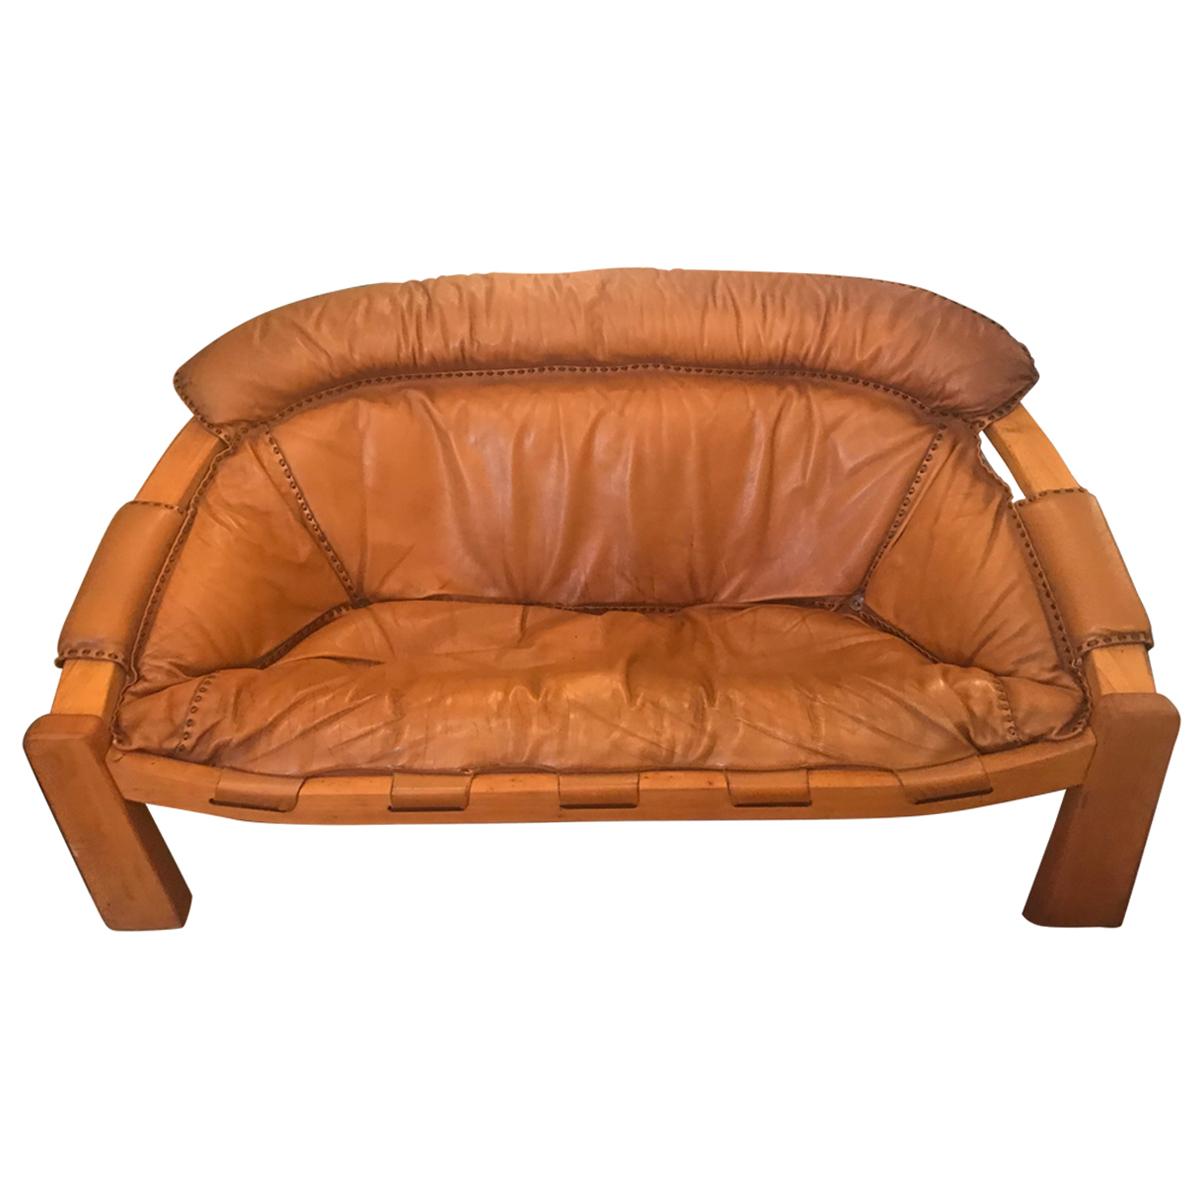 Midcentury Cognac Brown Leather Sofa For Sale